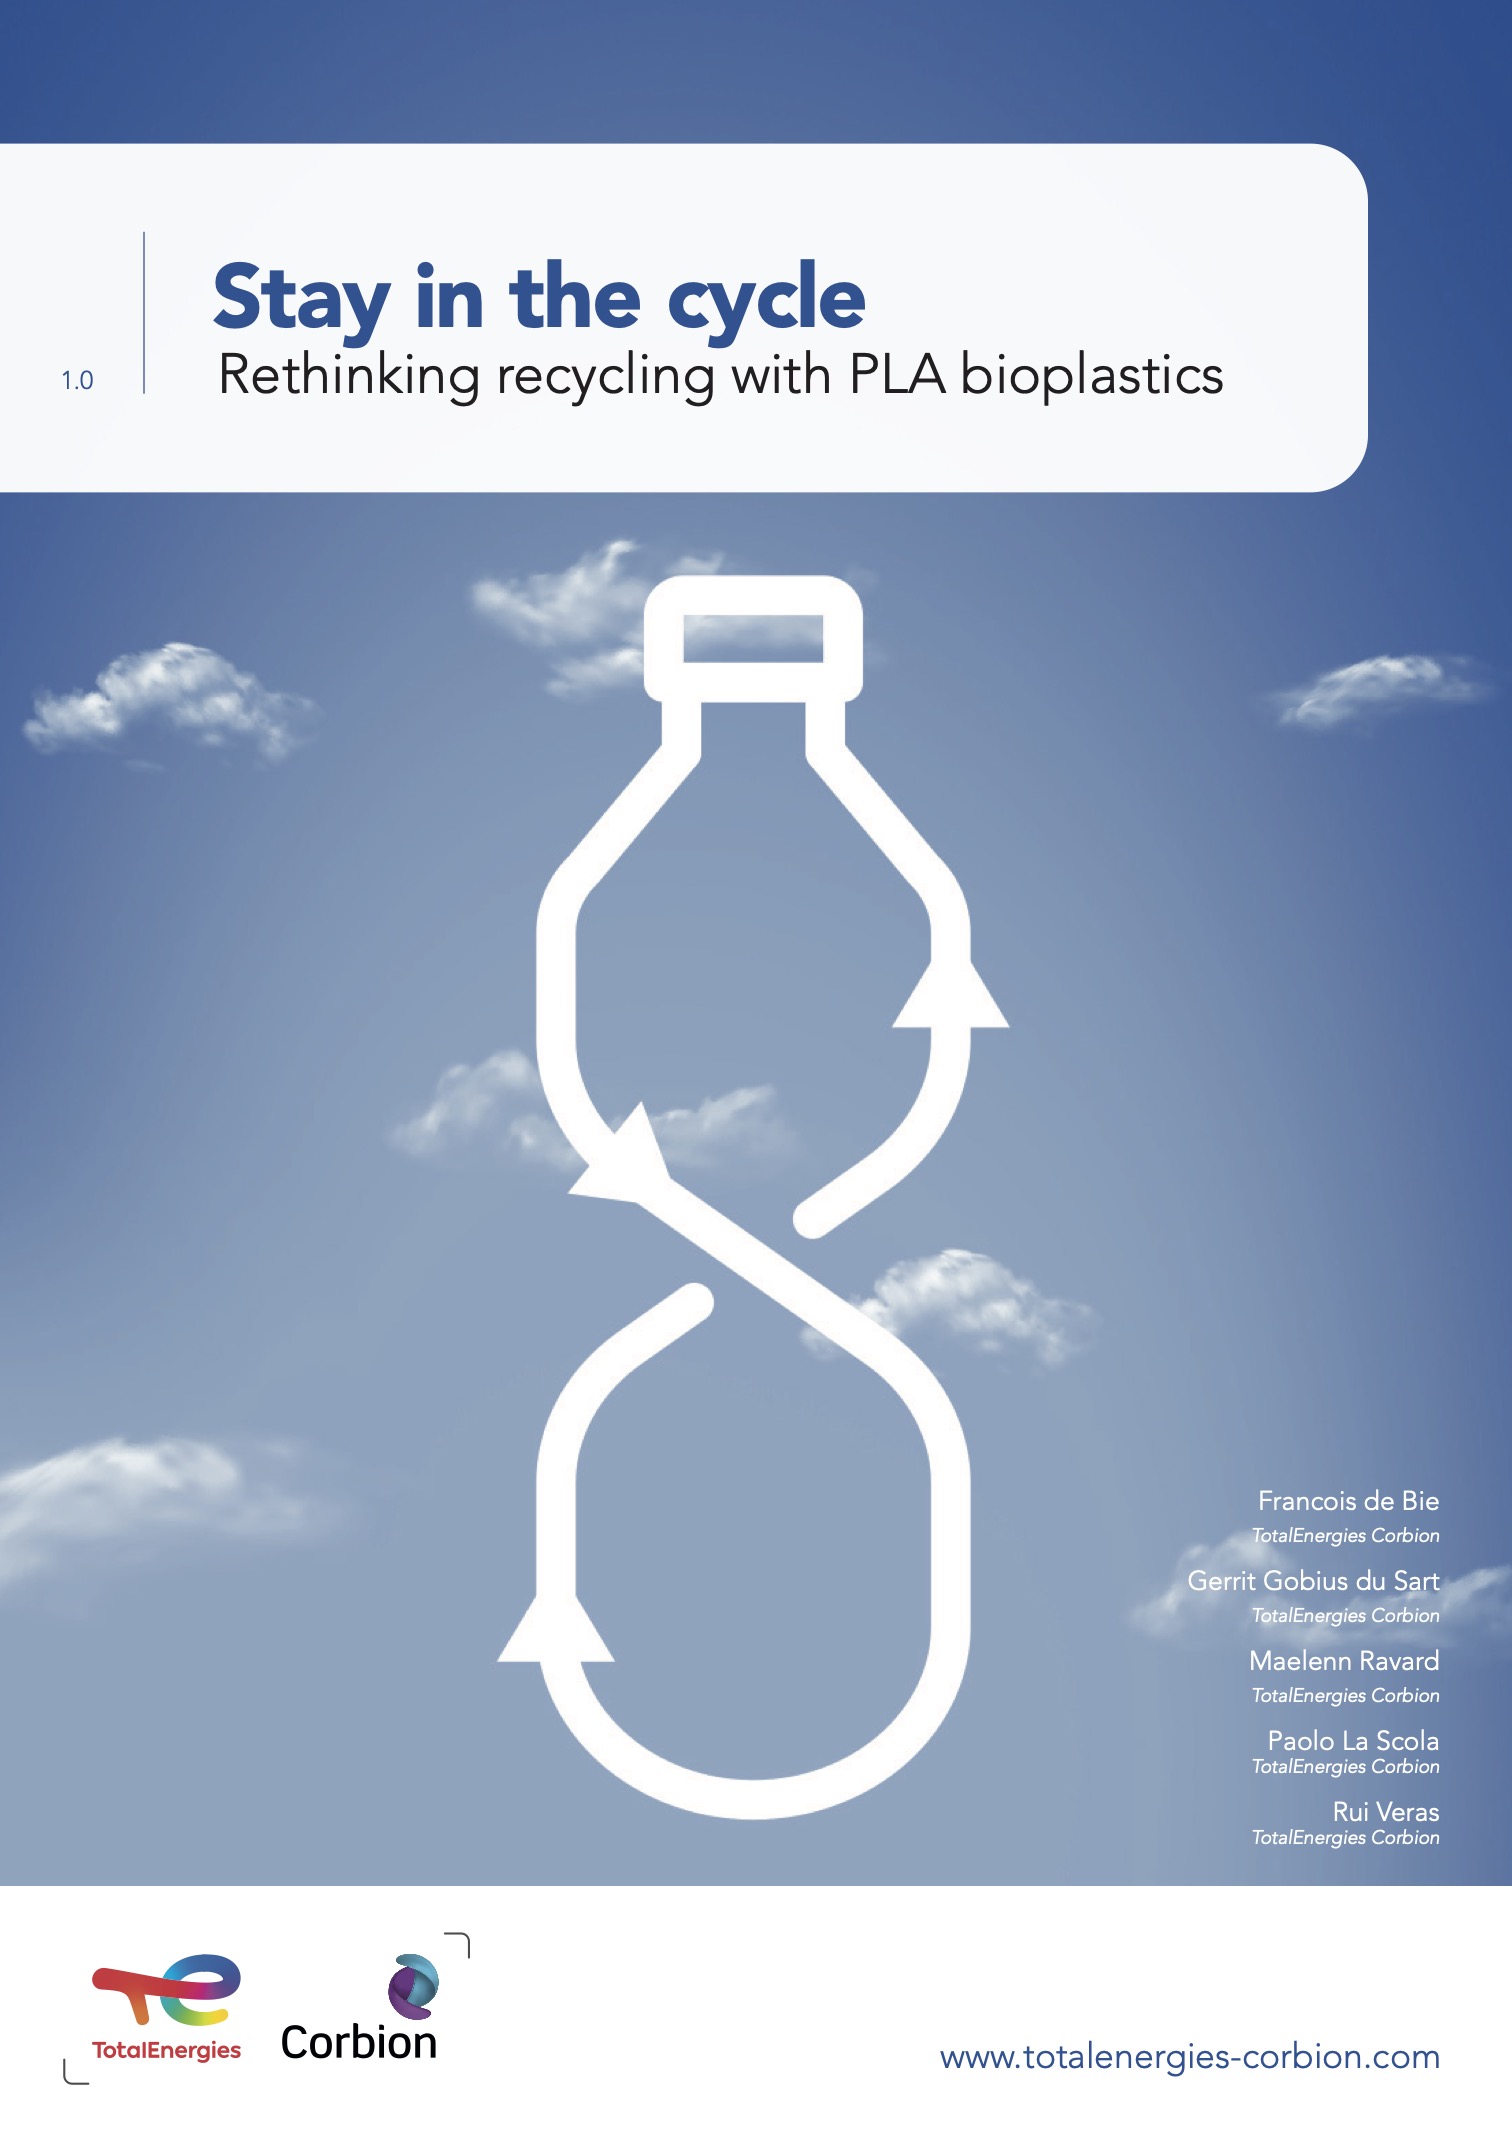 Cover of the TotalEnergies Corbion white paper: Stay in the Cycle, rethinking recycling with PLA bioplastics.